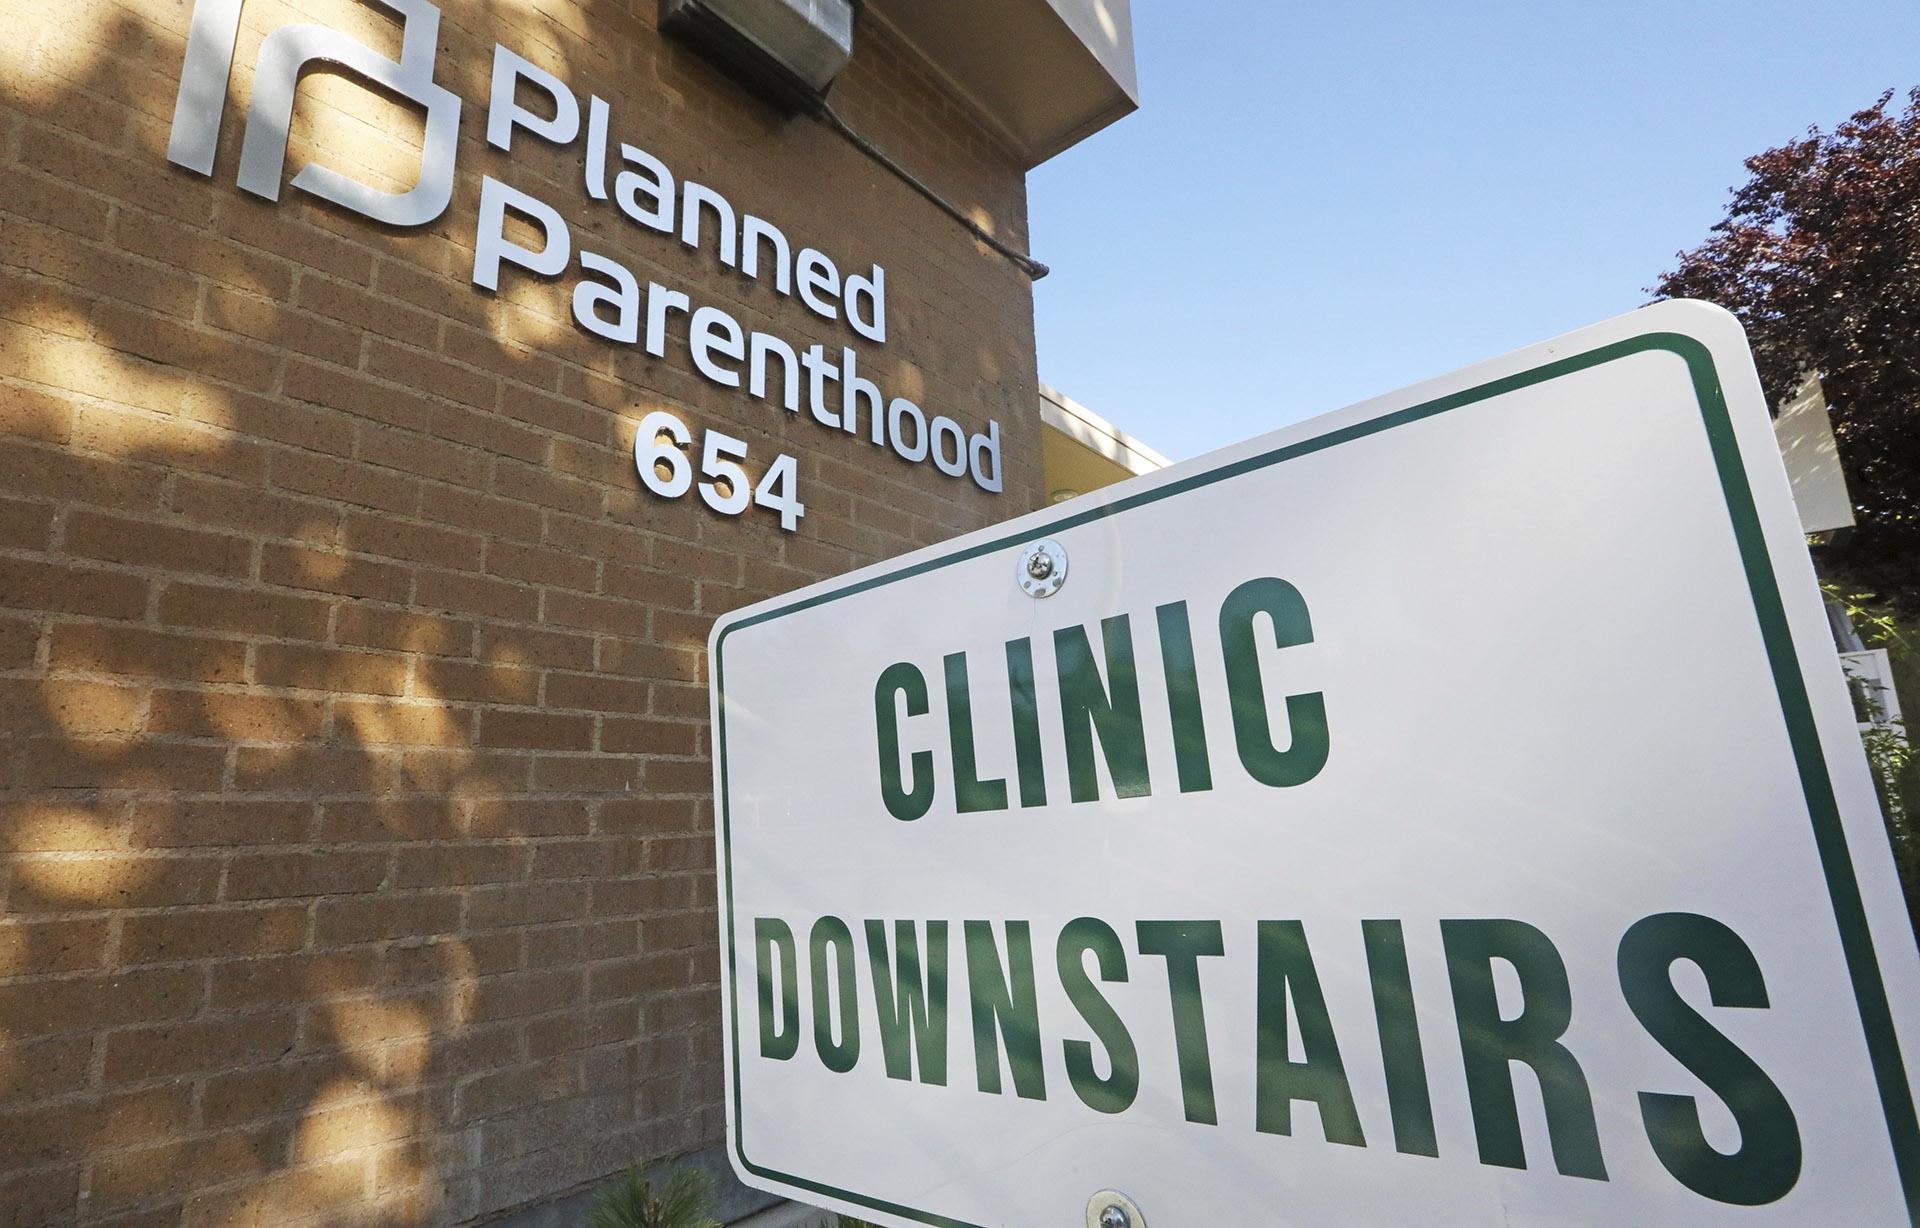 A sign is displayed at Planned Parenthood of Utah Wednesday, Aug. 21, 2019, in Salt Lake City. About 39,000 people received treatment from Planned Parenthood of Utah in 2018 under a federal family planning program called Title X. The organization this week announced it is pulling out of the program rather than abide by a new Trump administration rule prohibiting clinics from referring women for abortions. (AP Photo / Rick Bowmer)